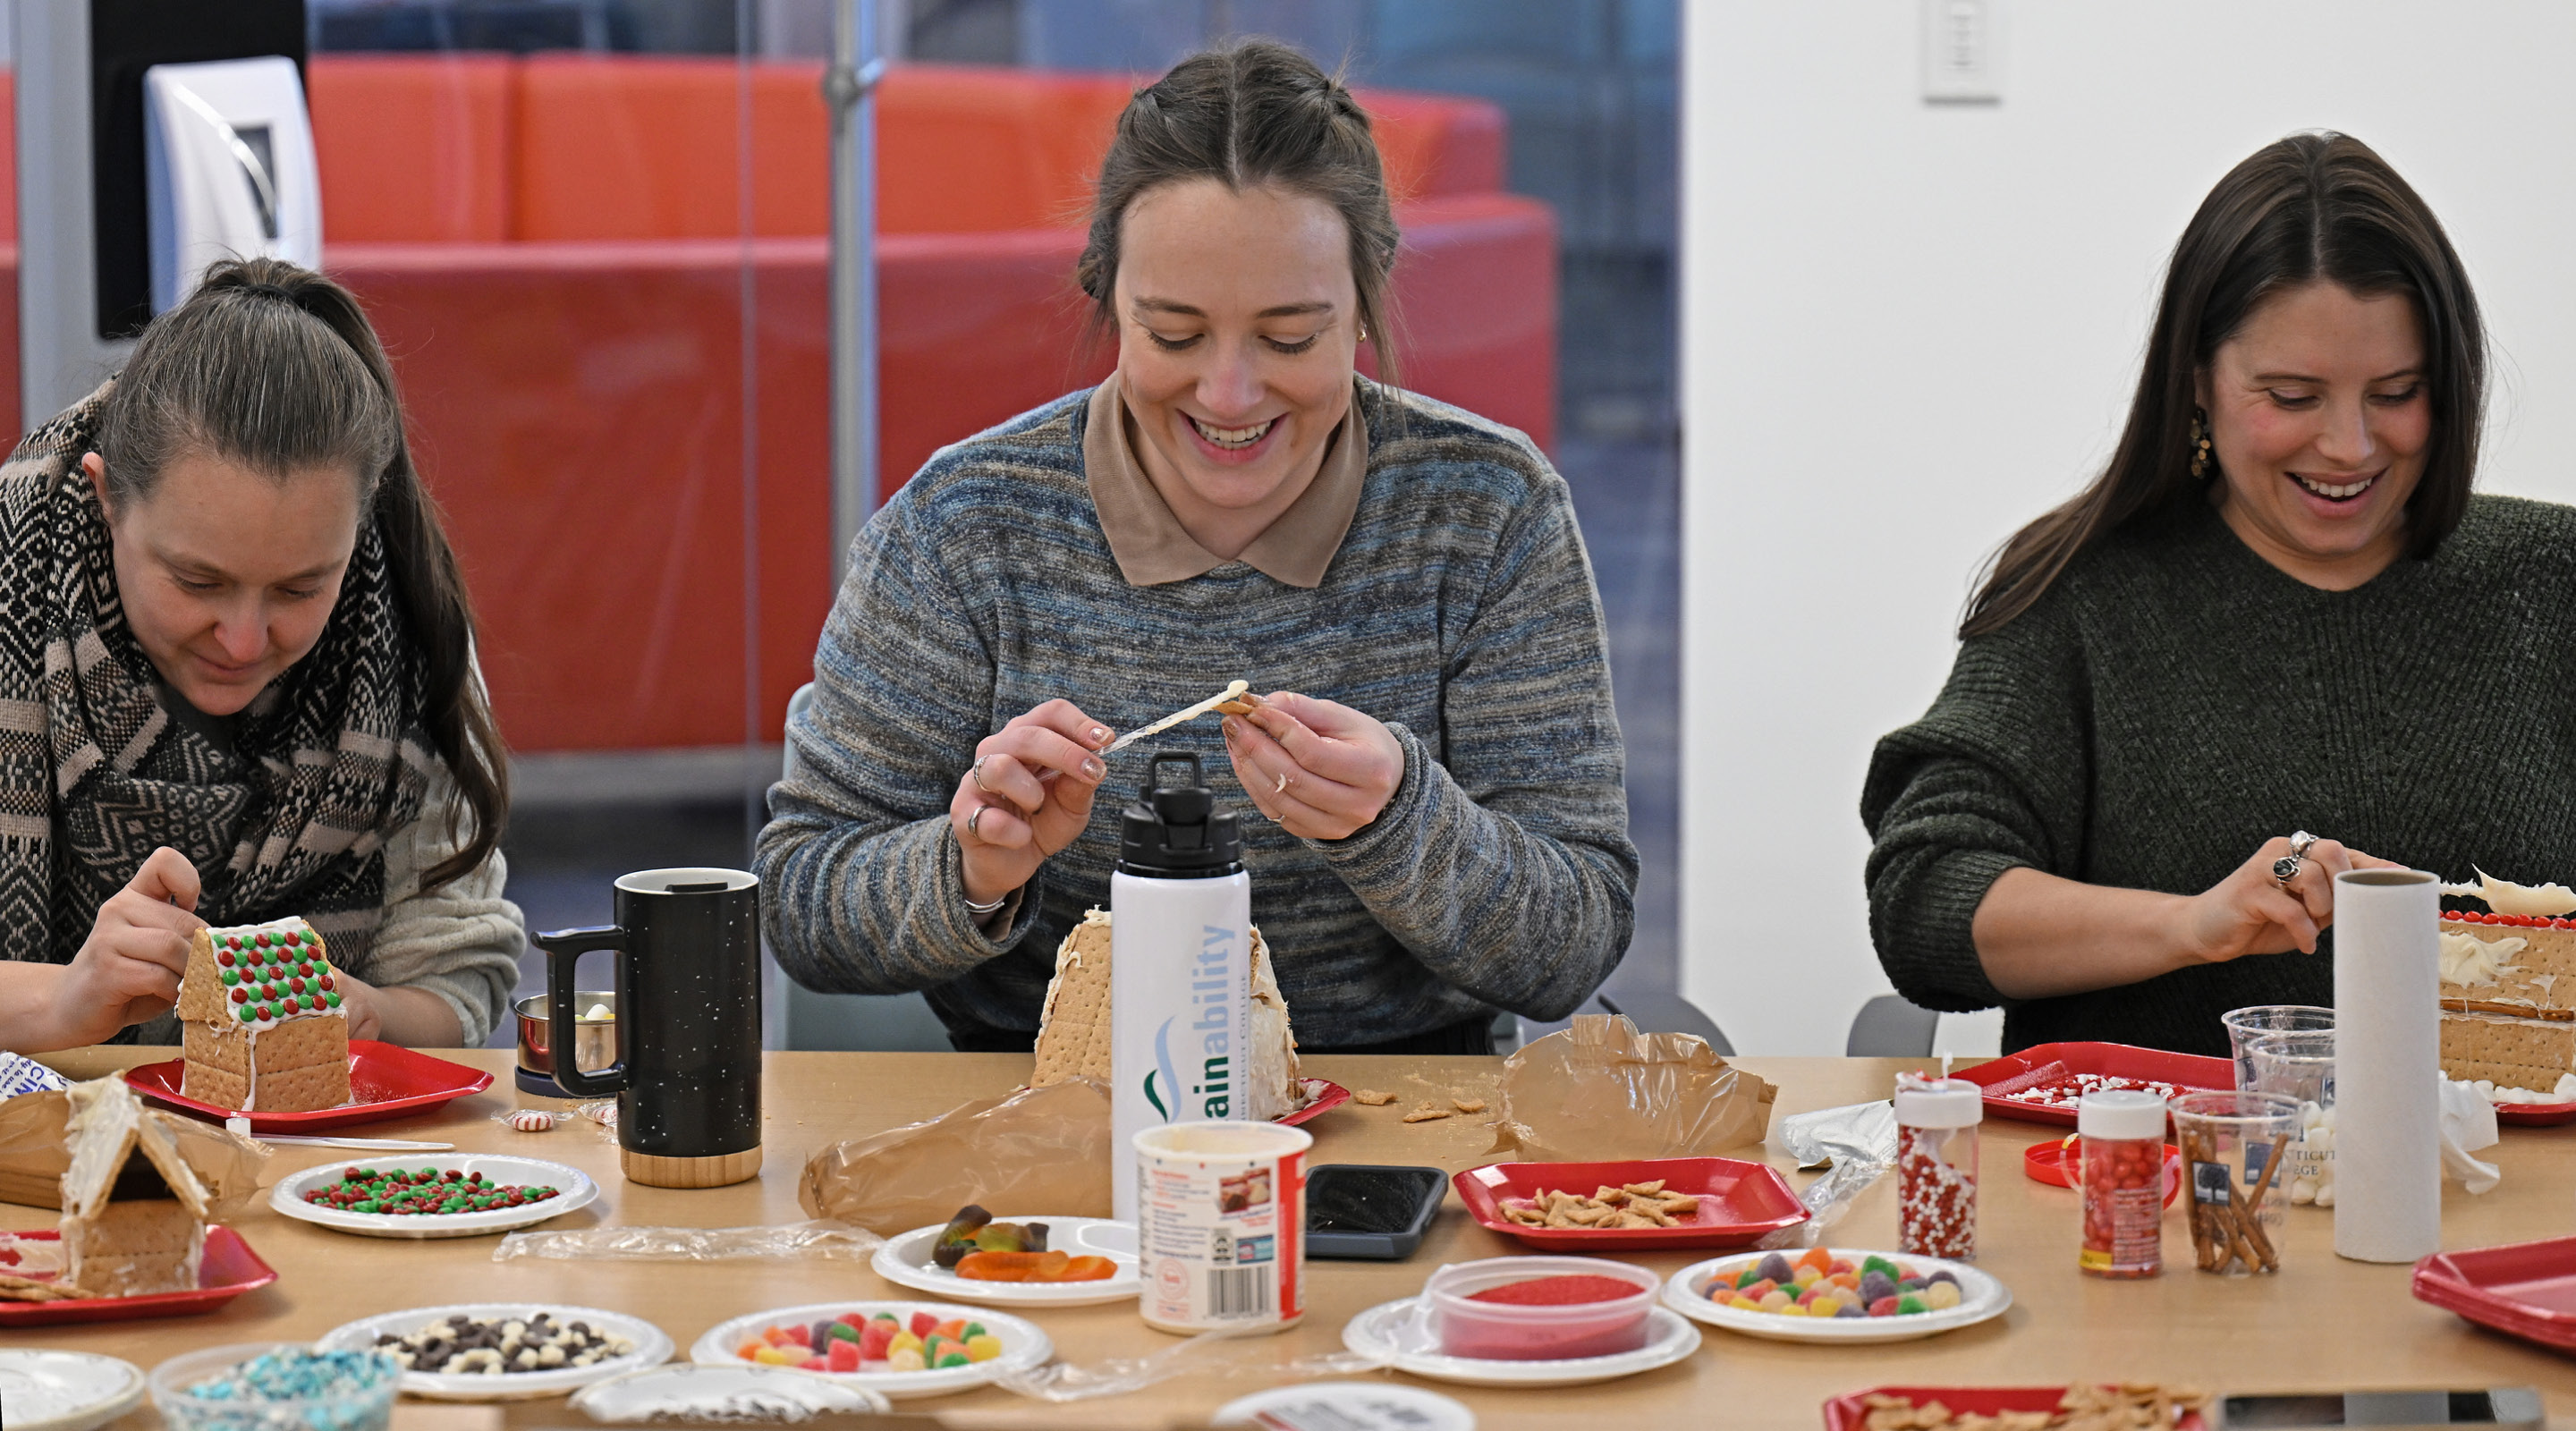 Margaret Bounds, Director of Sustainability, left, Ashlyn Healey,  Director Summer Programs,  center, and Cara Masullo Ekwuabu, Director CISLA Operations, work on their candy house creations during the Global/Local Engagement Council (GLEC) Holiday party